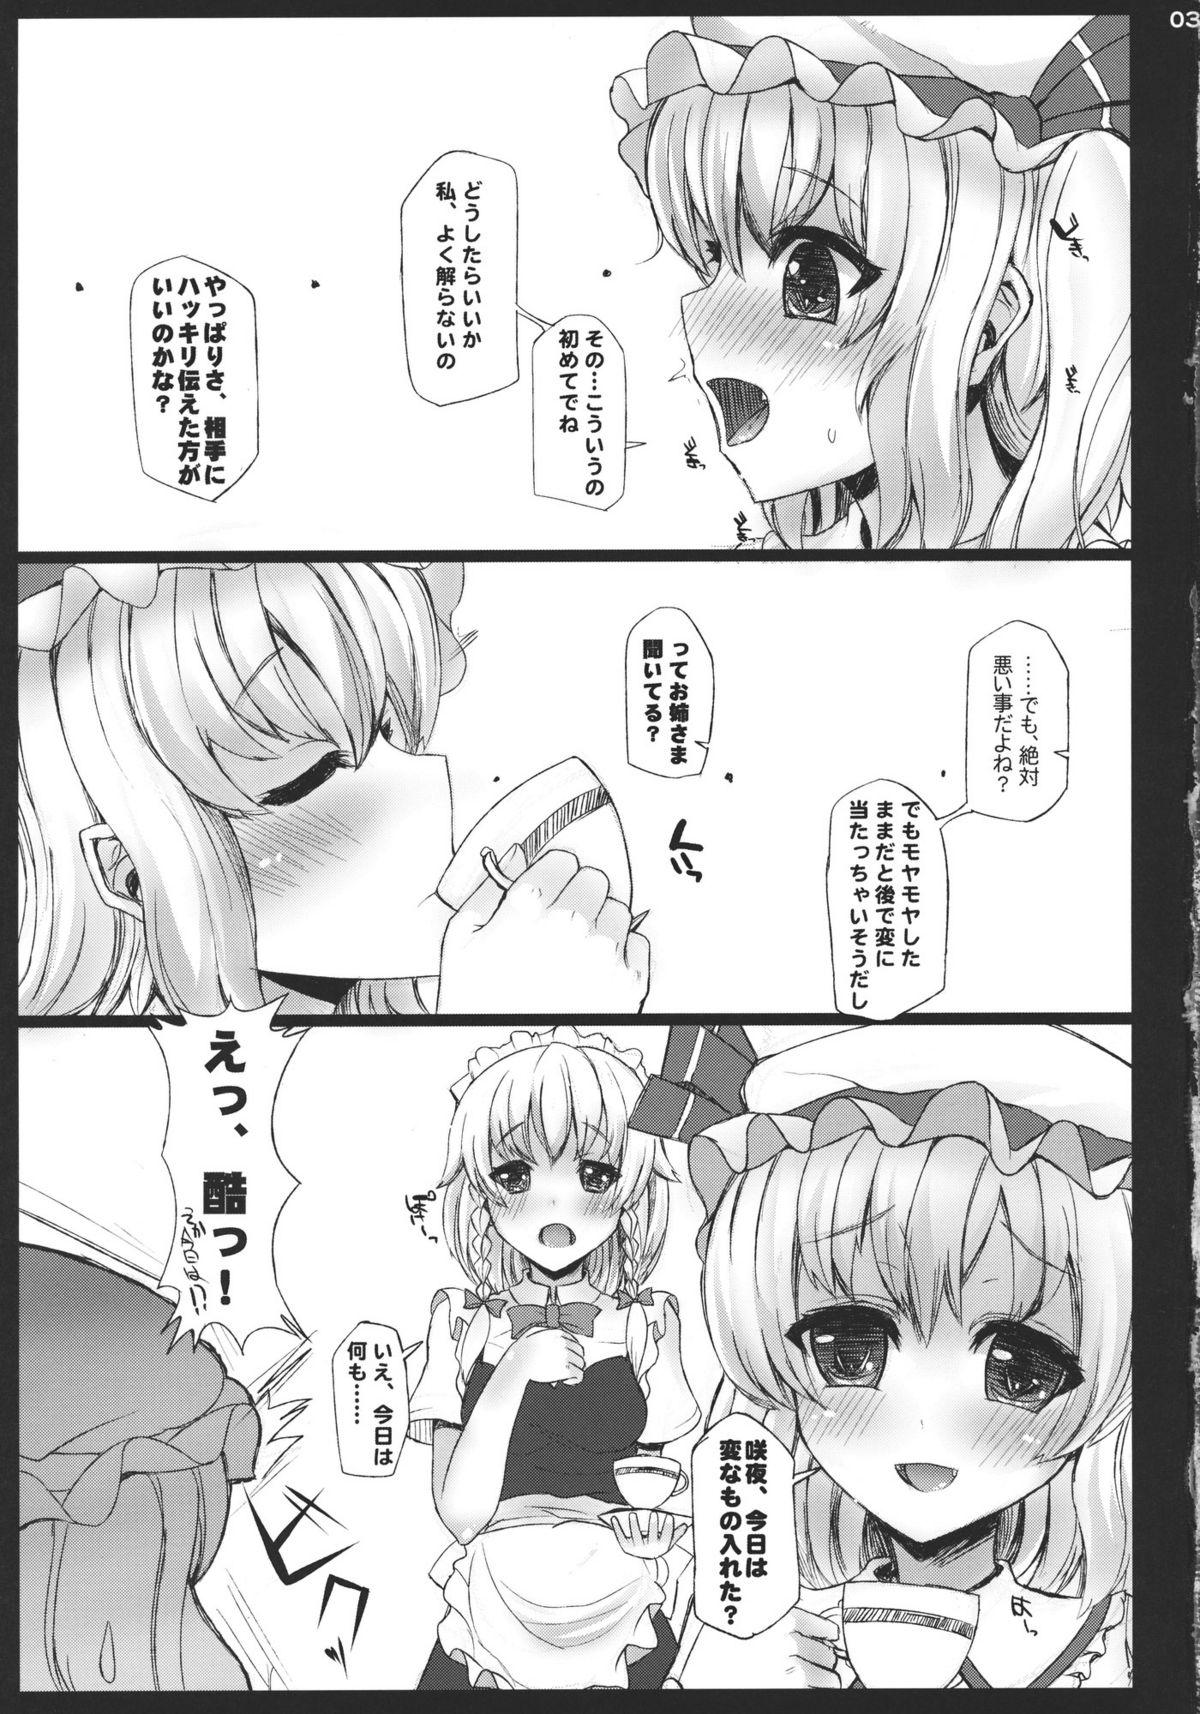 Old MILK - Touhou project Sucks - Page 3